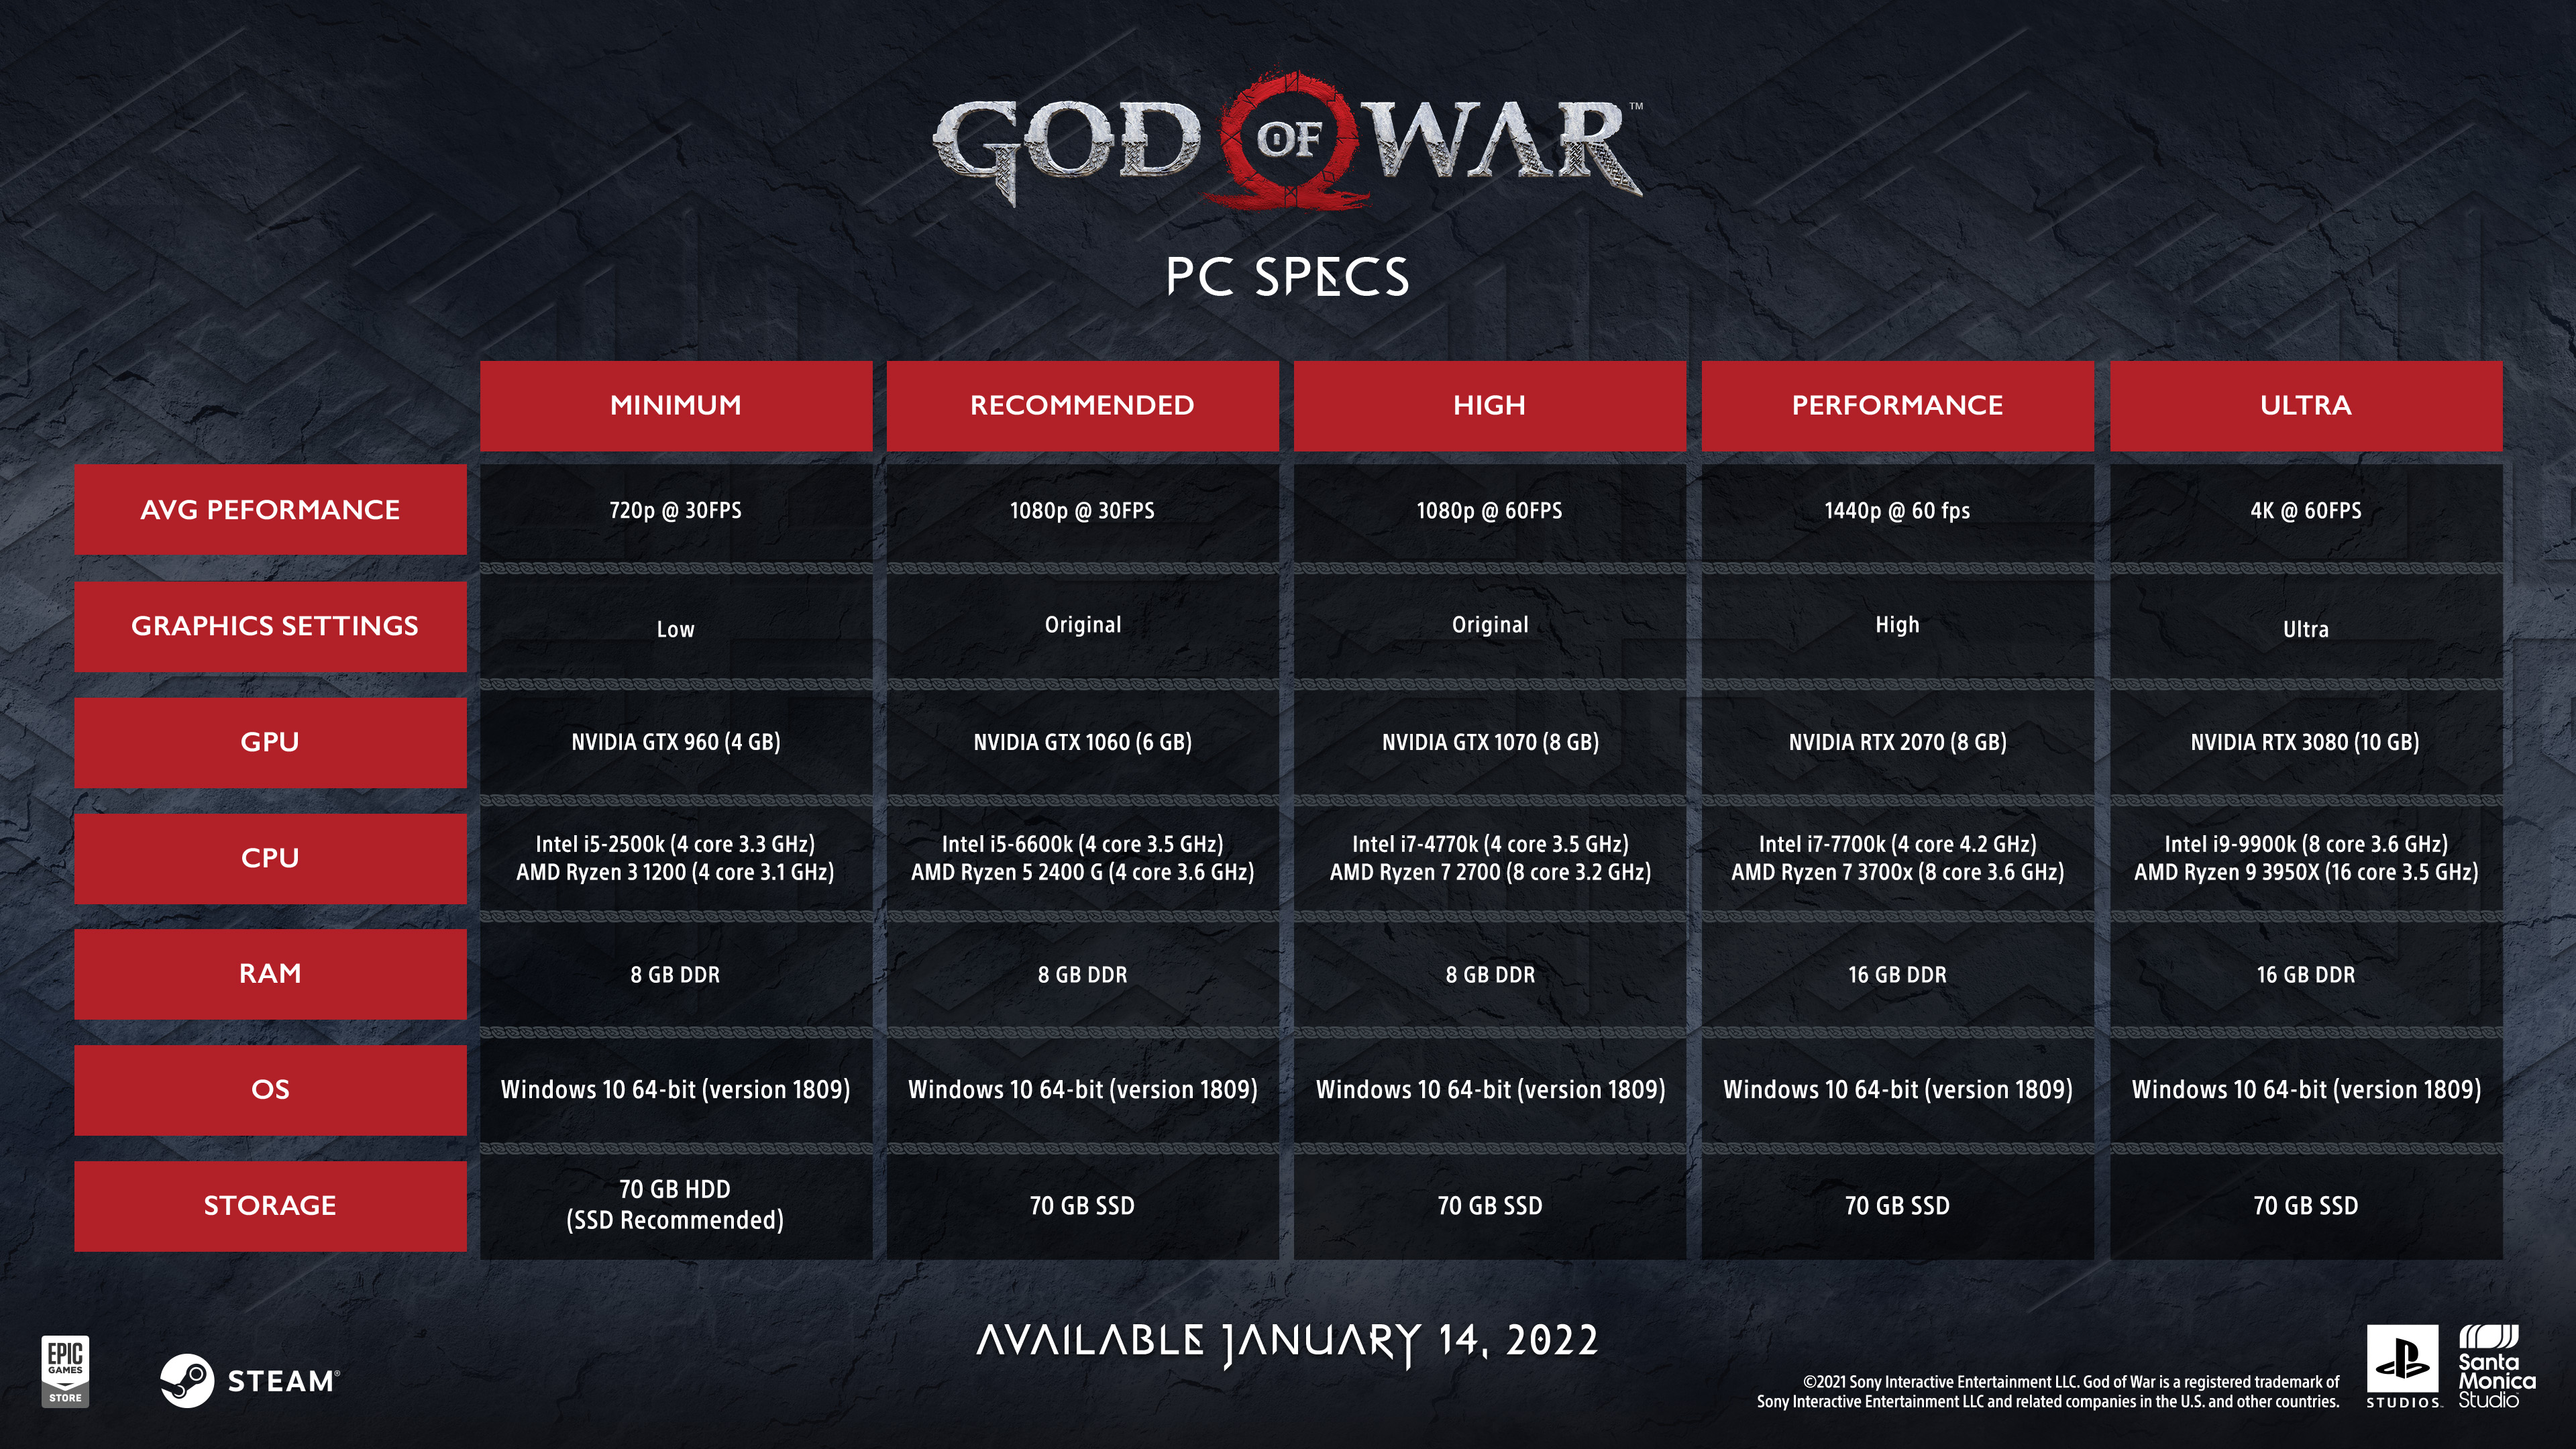 Extentive list of PC requirements for God of War PC